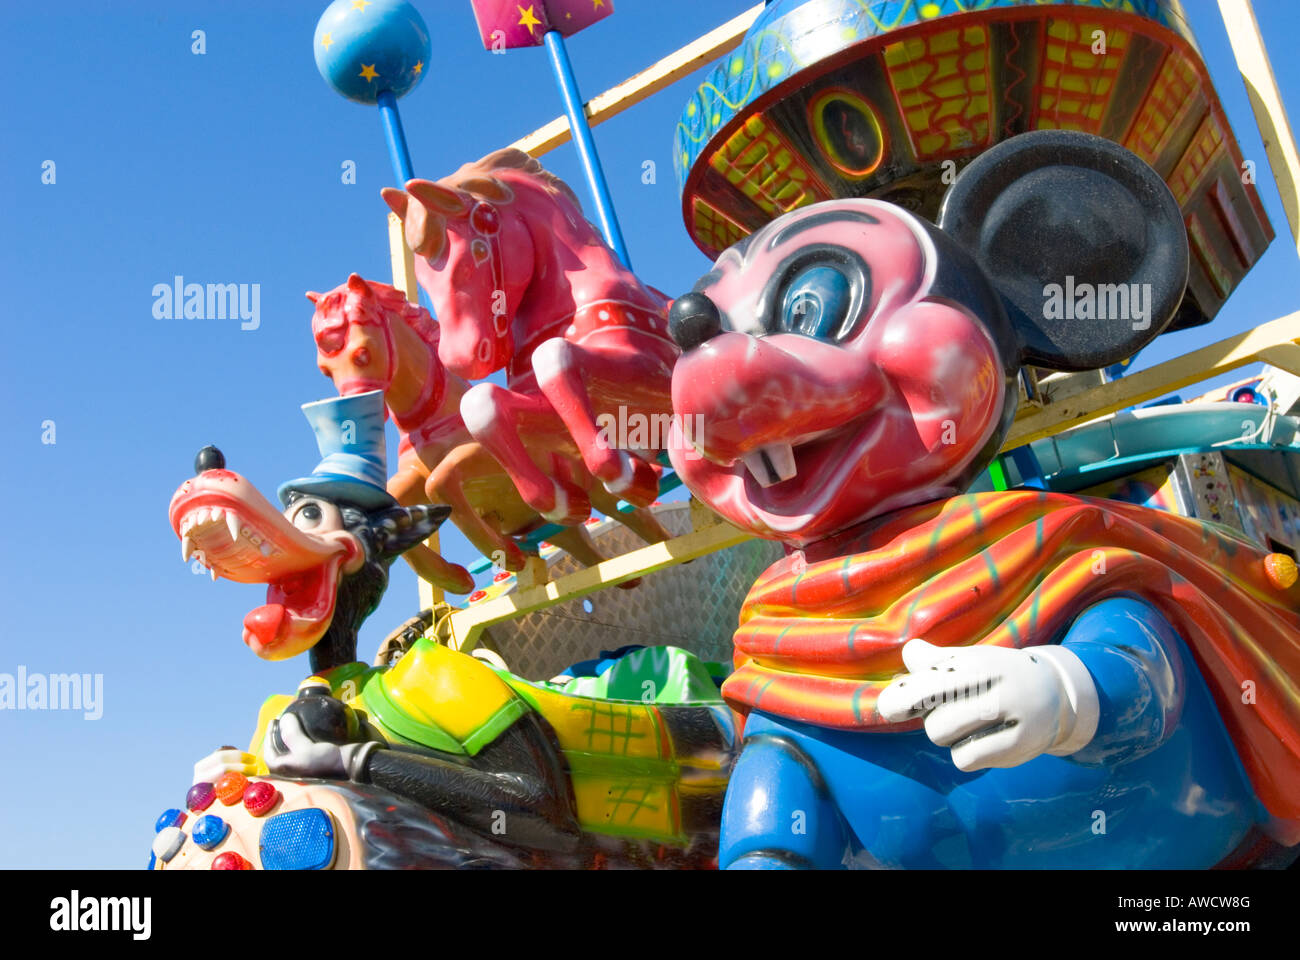 Spain Canary Islands Tenerife Mickey Mouse and Goofy colourful funfair figures smiling loughing screaming yelling fun Stock Photo